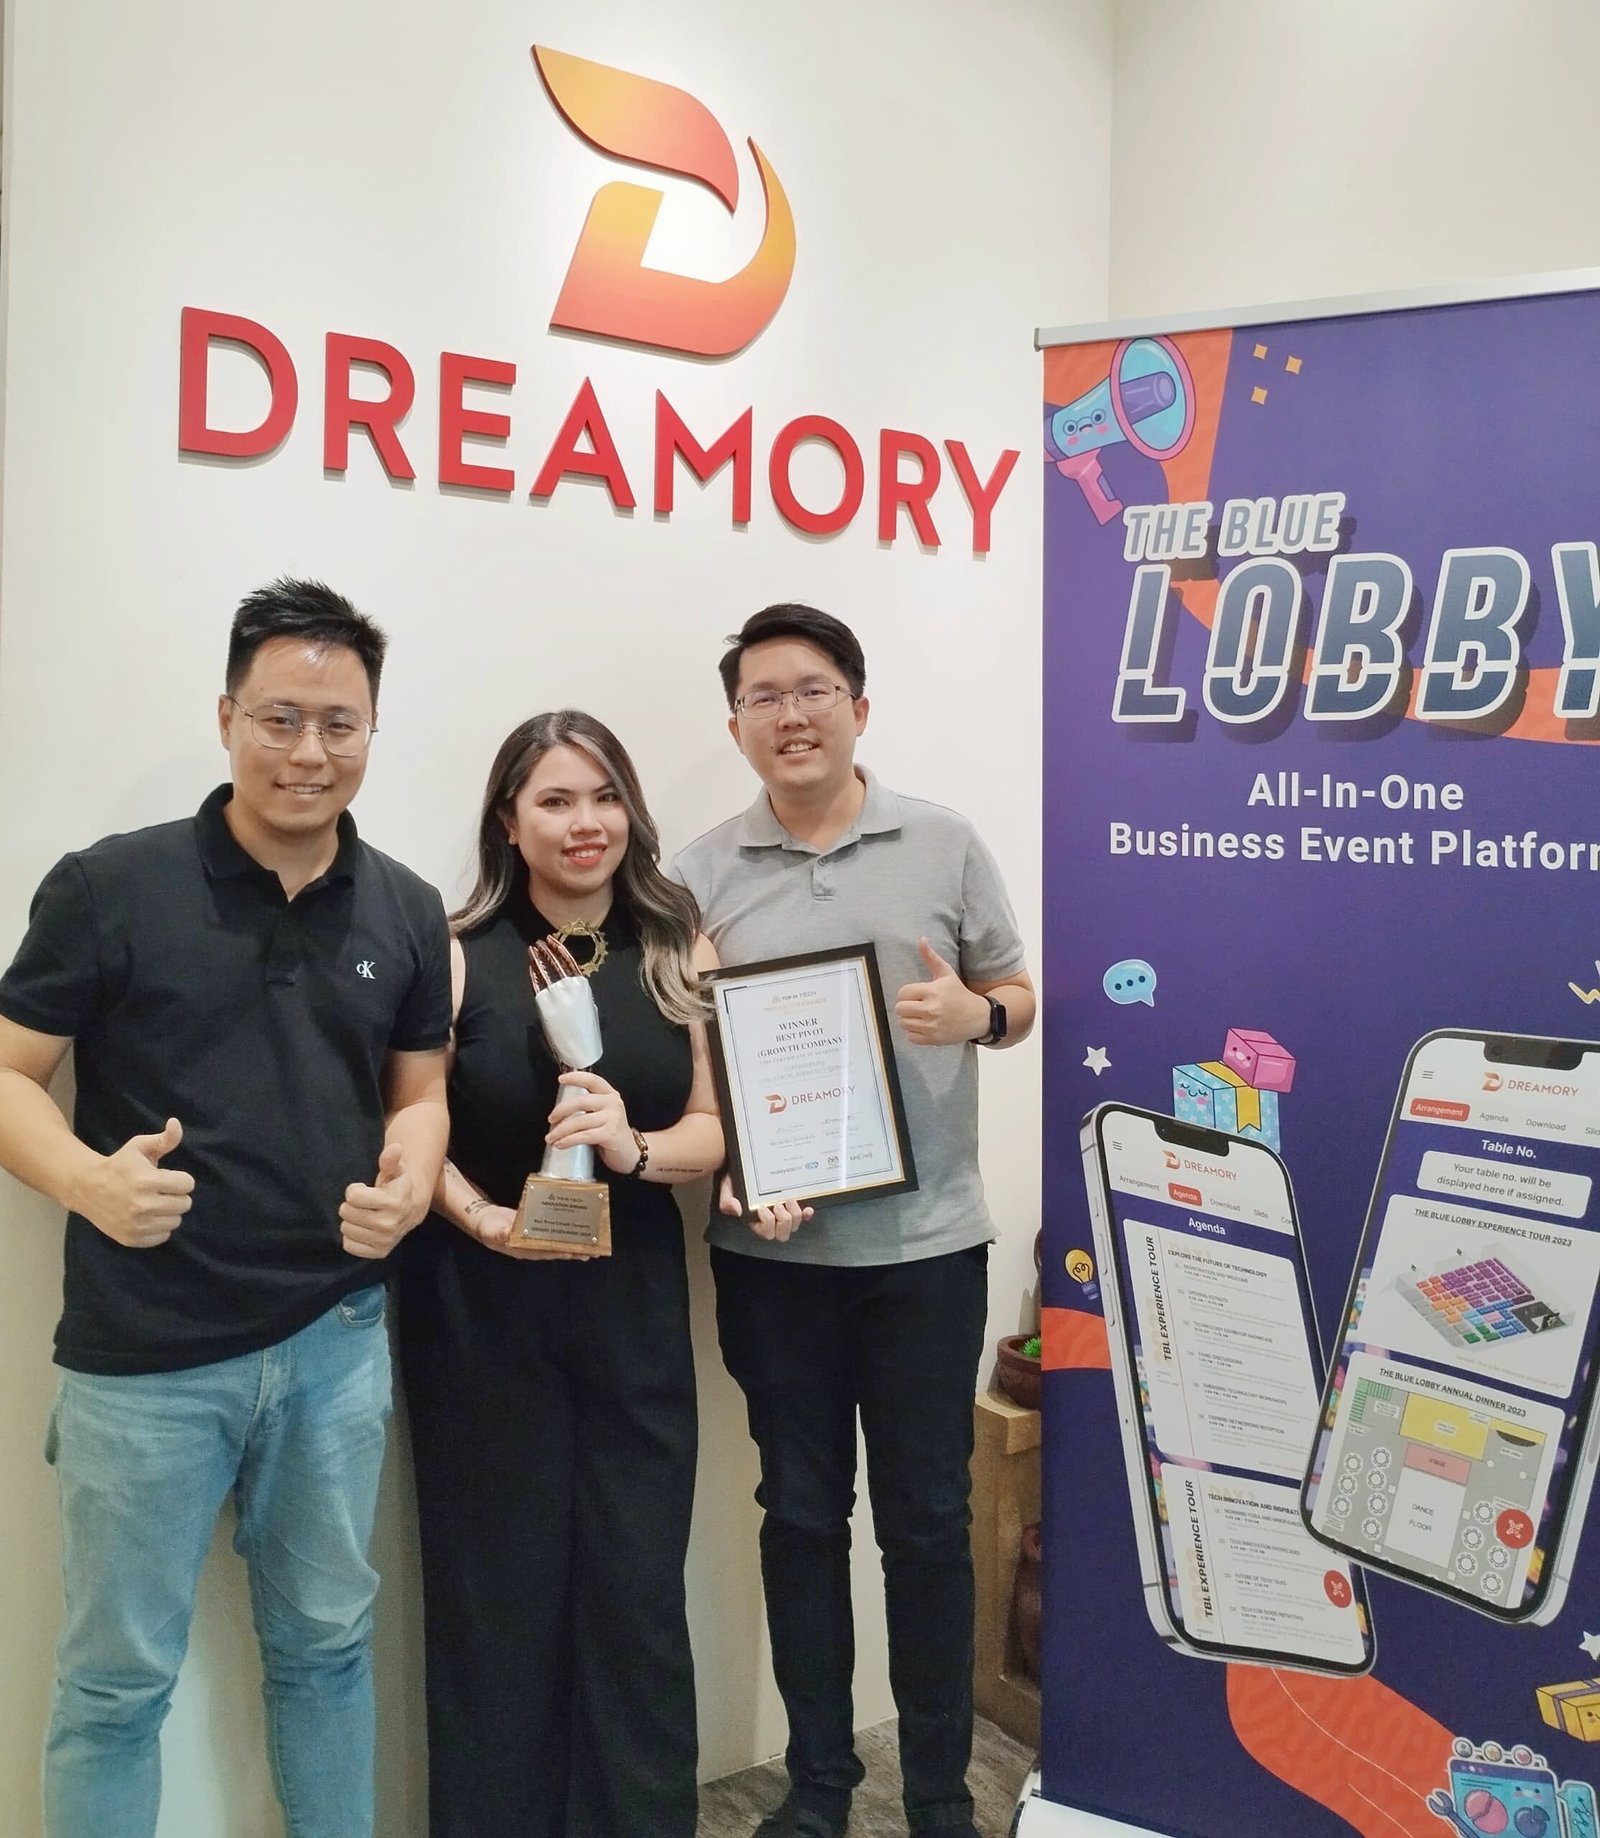 Best Pivot Growth Company in the 3rd edition of the Top in Tech Innovation Awards Dreamory Entertainment Group